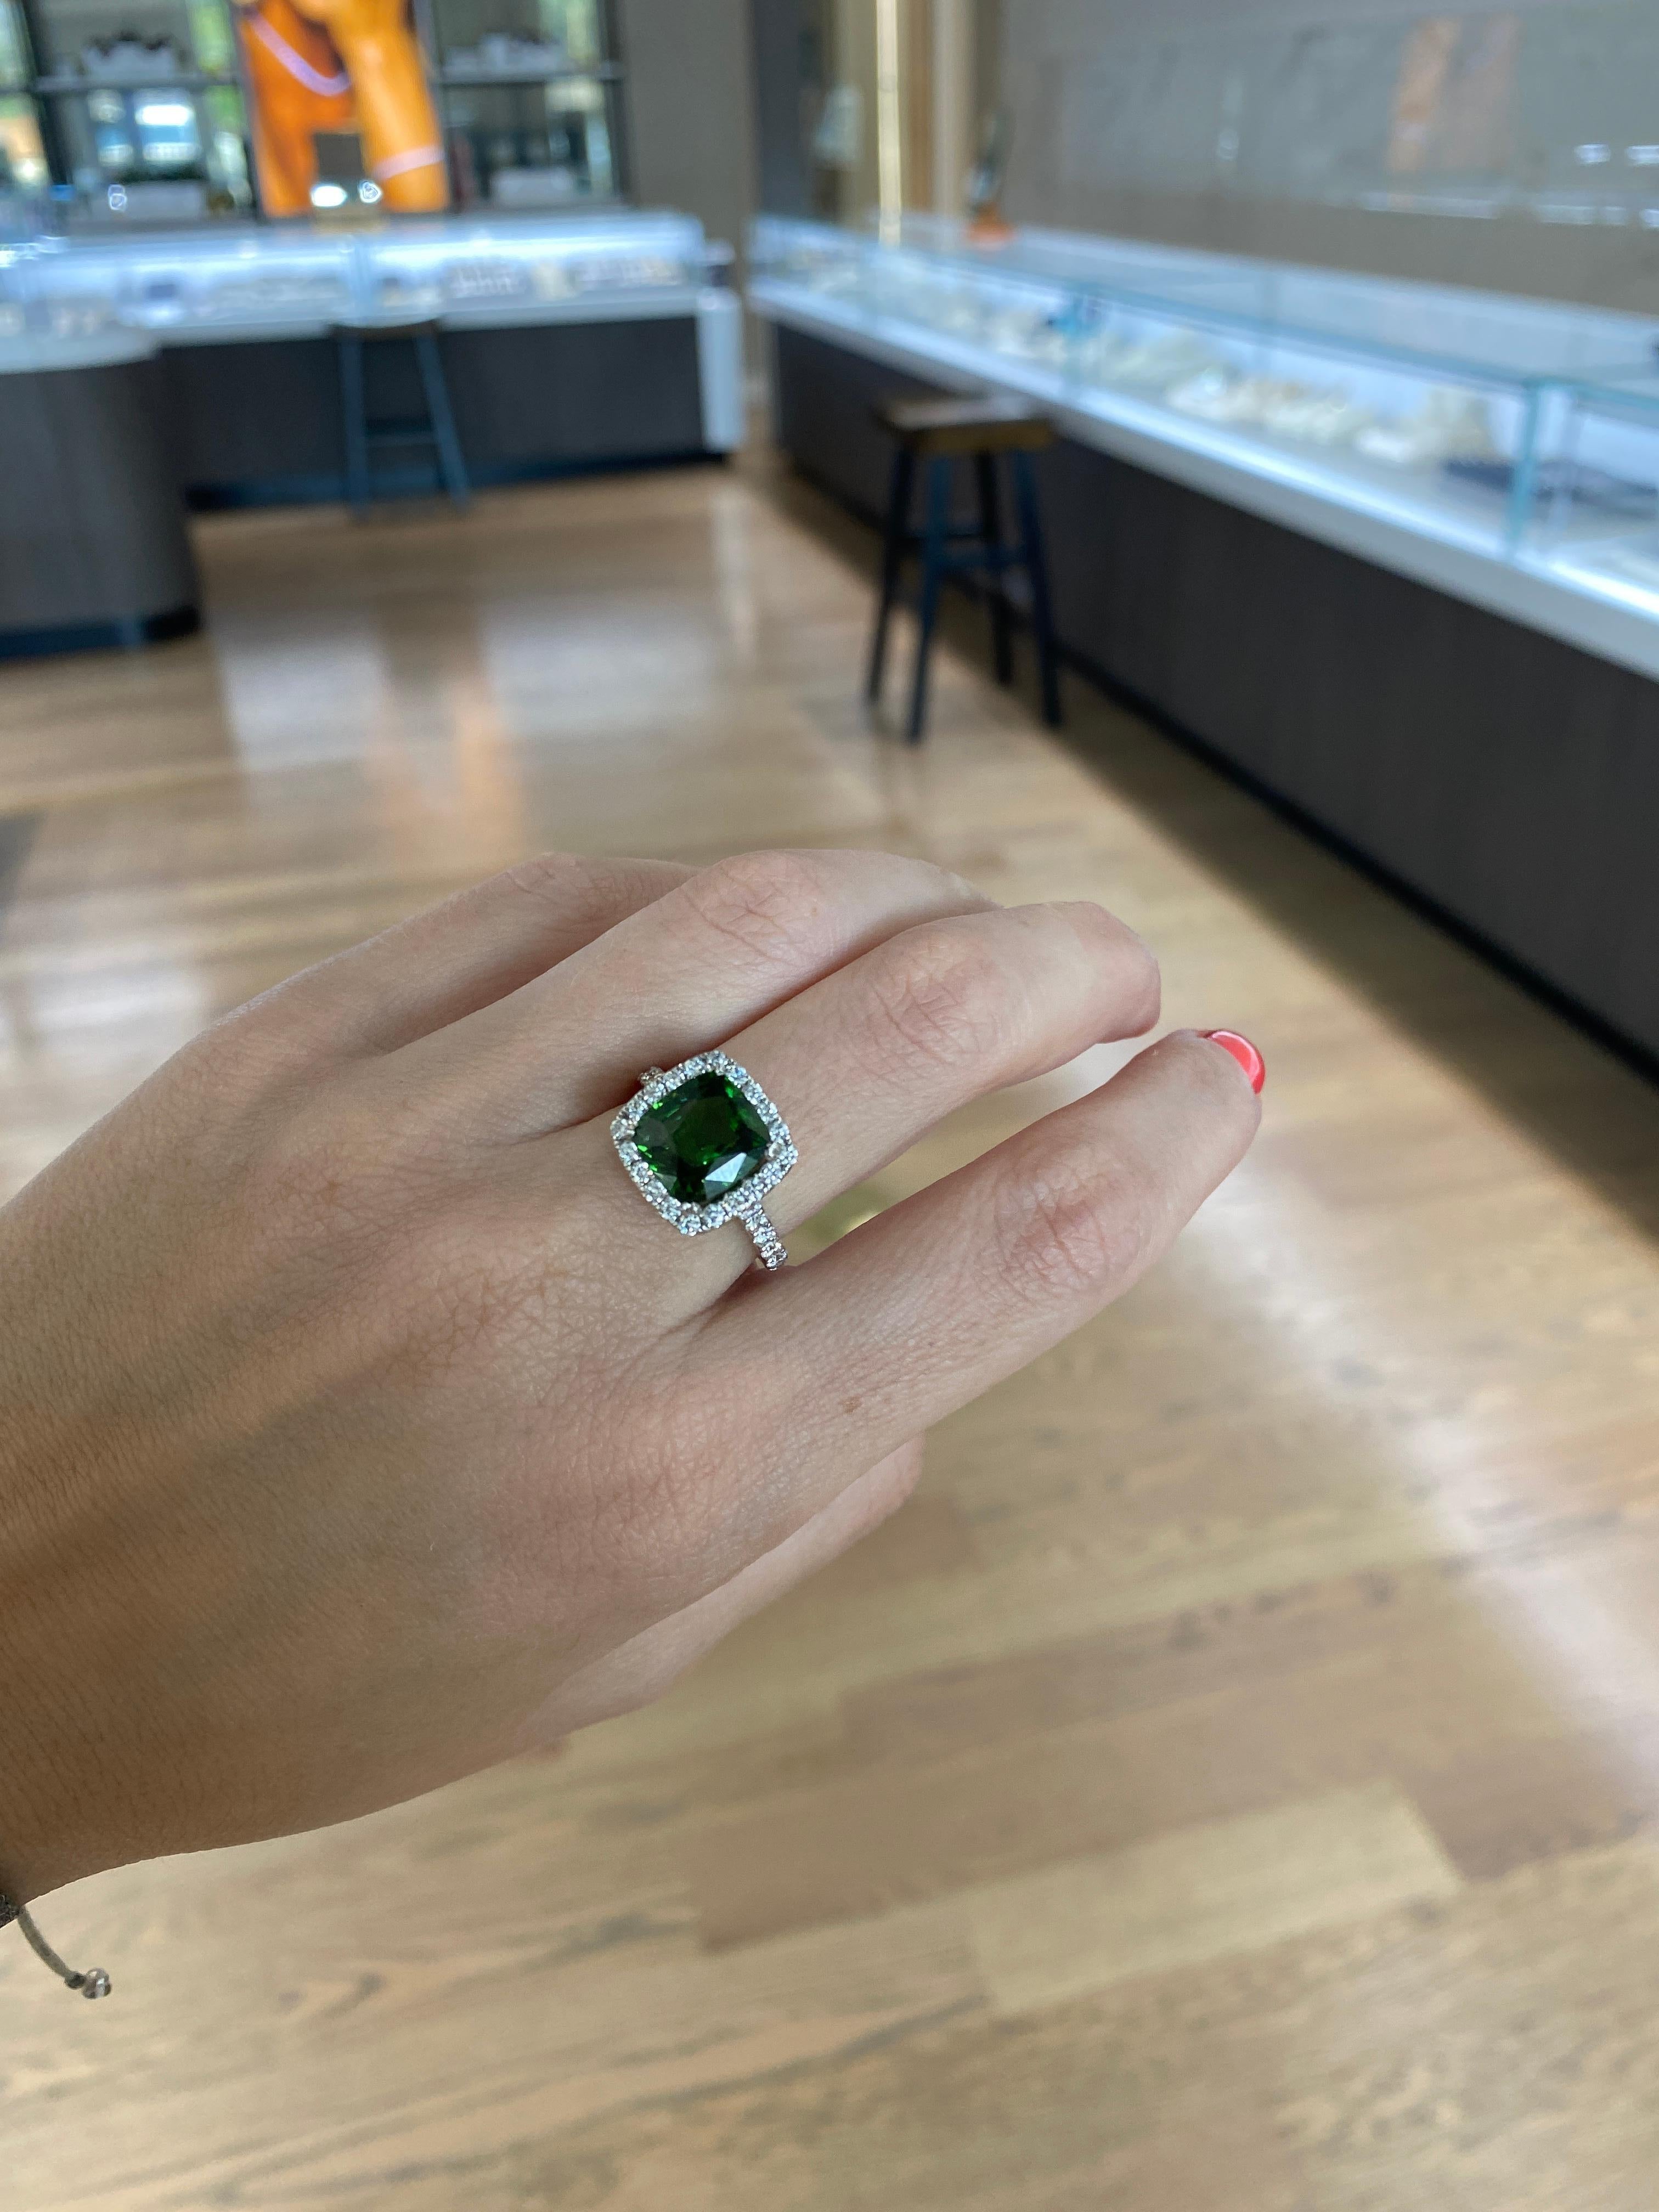 5.42 Carat Cushion Cut Green Zircon Ring with 0.52 Carat Total Diamond Halo For Sale 5